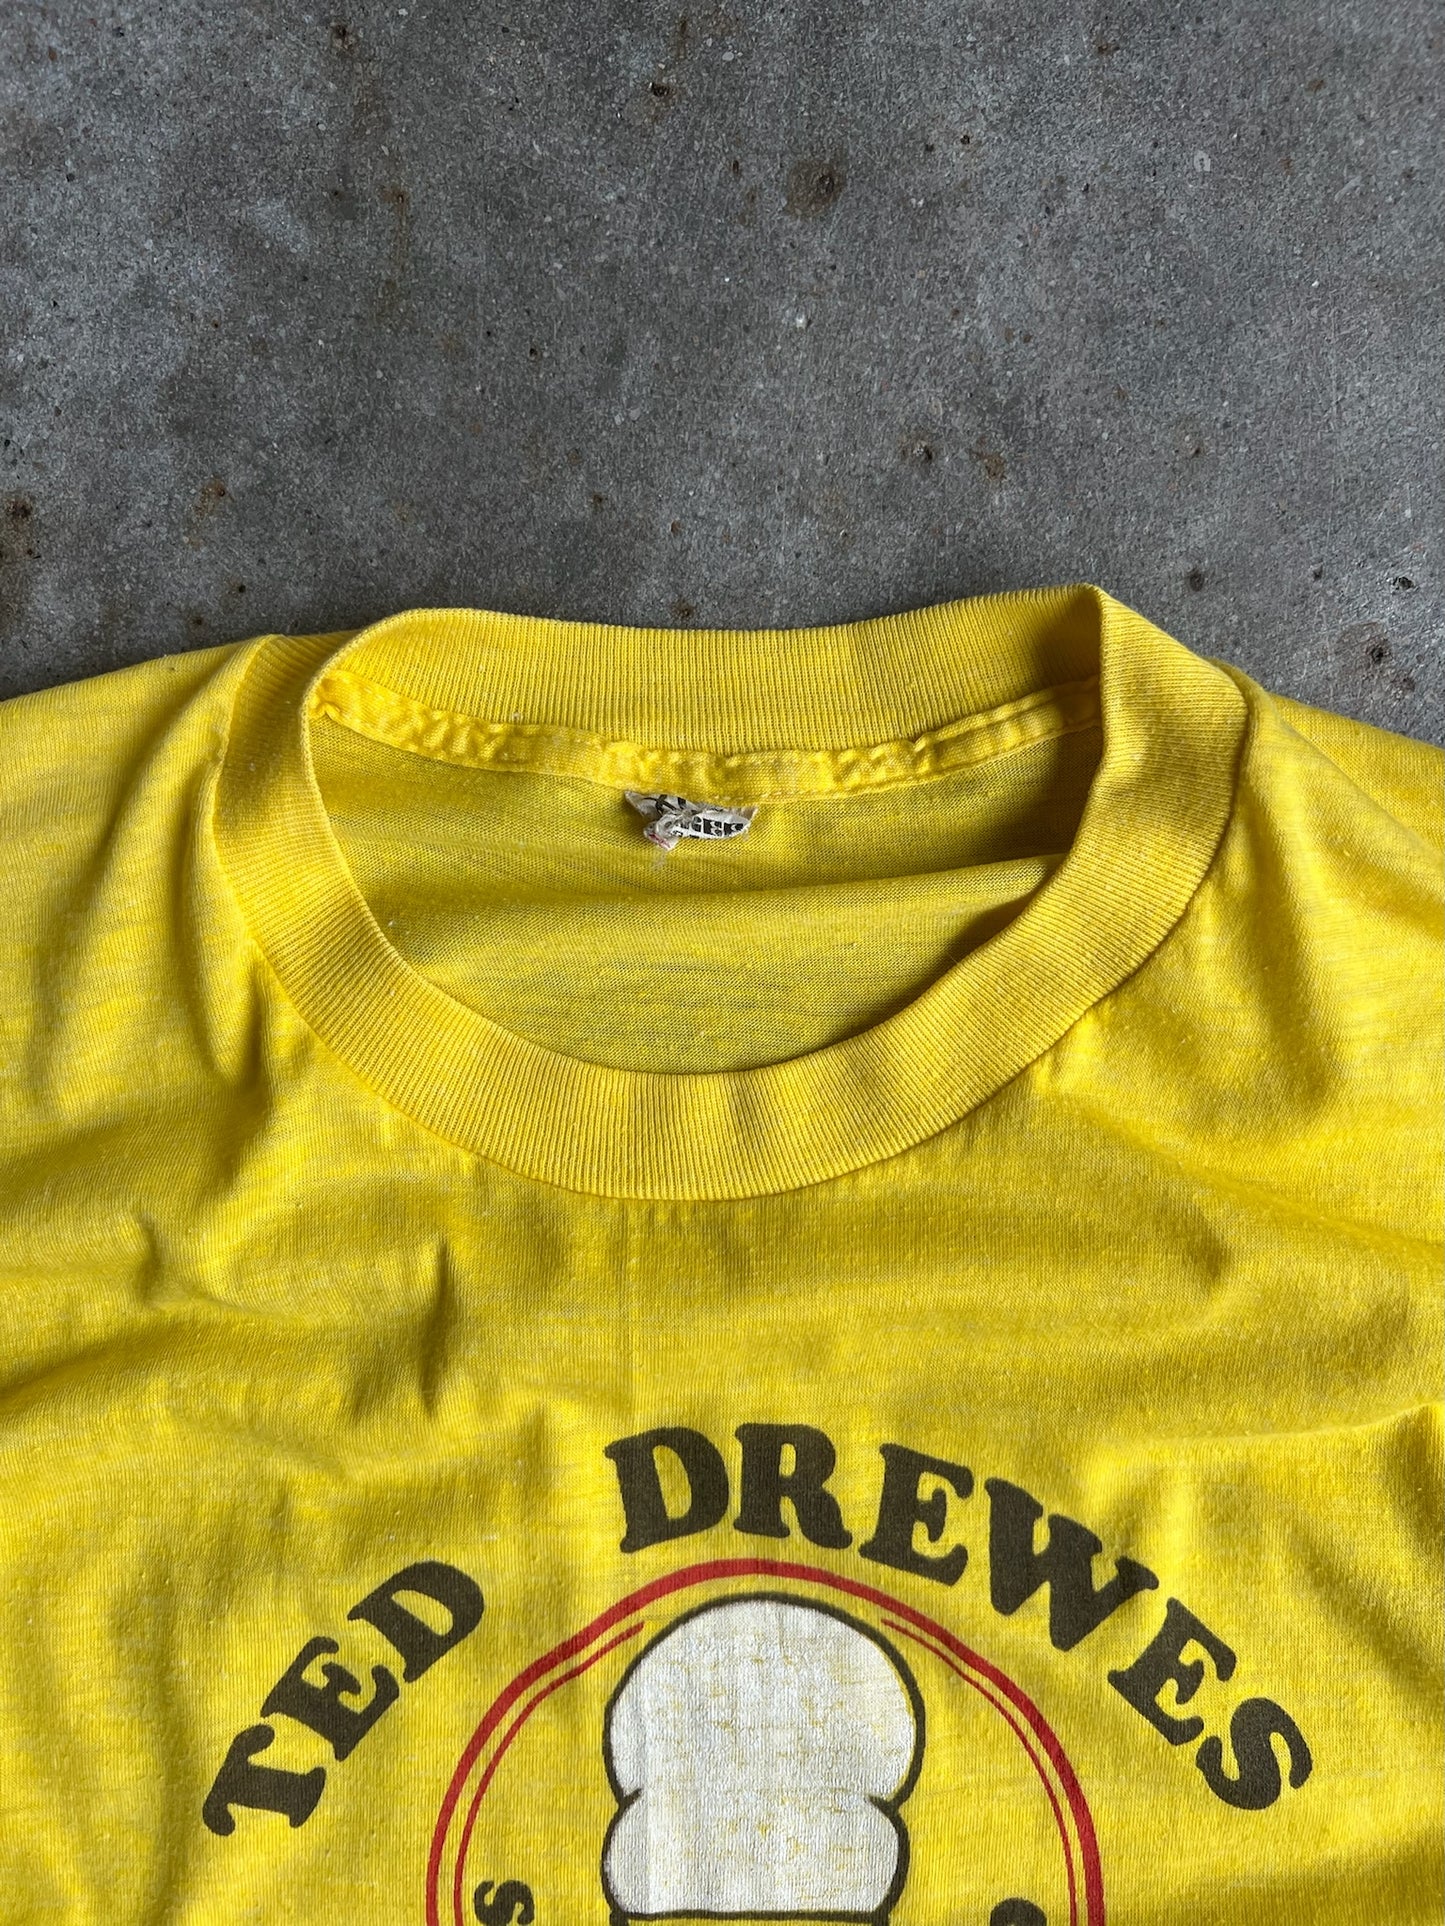 Vintage Ted Drewes Shirt - XL